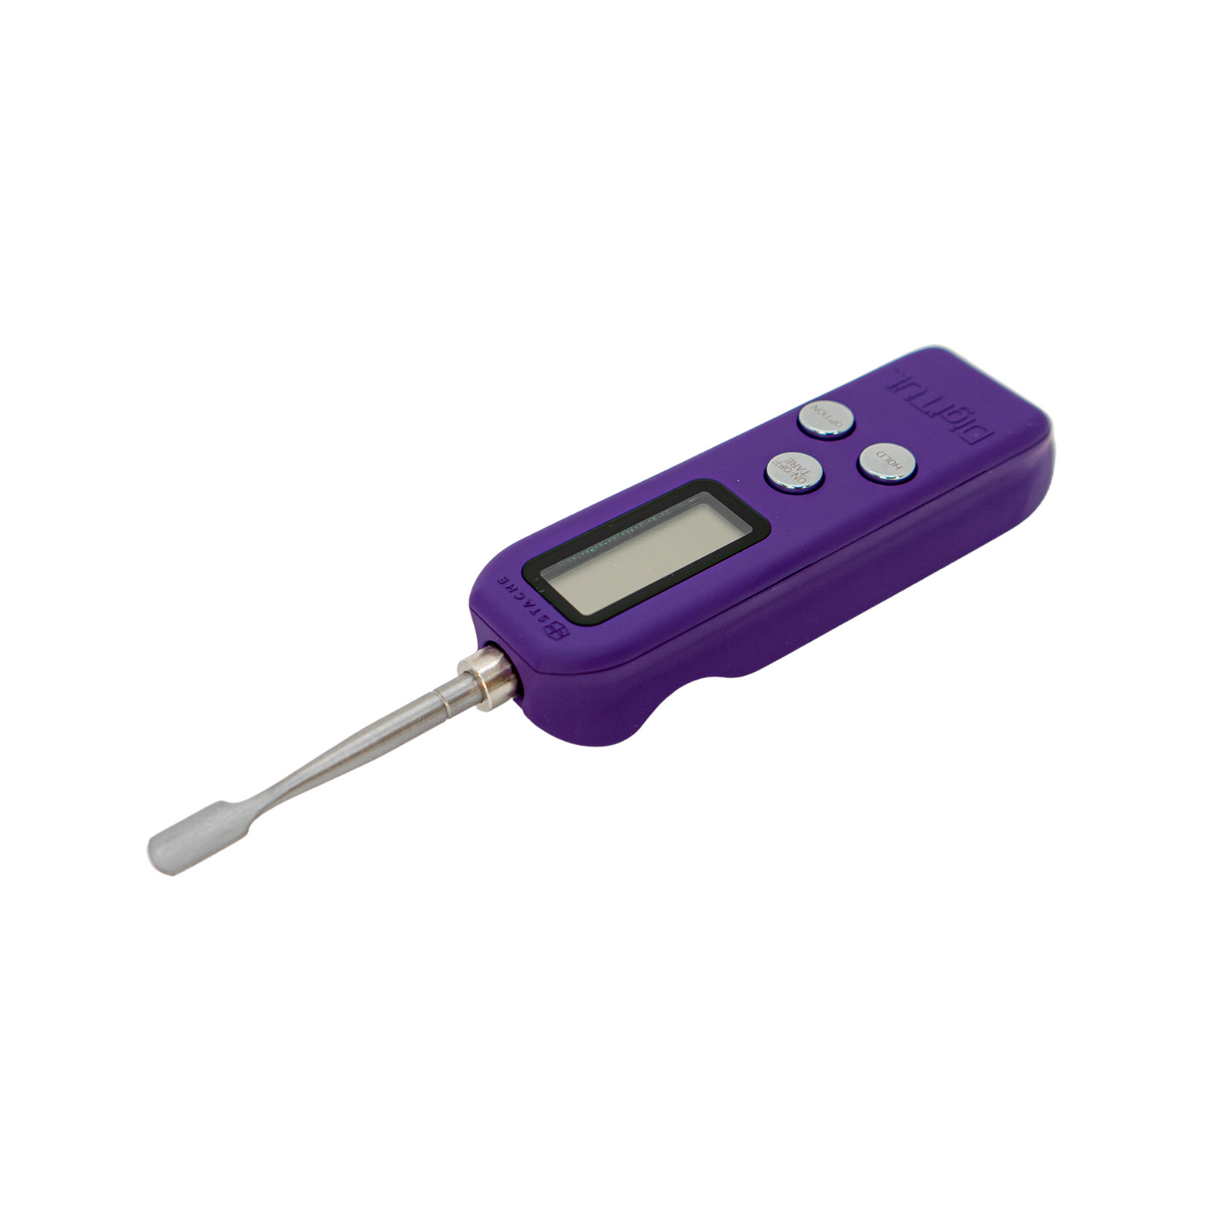 Stacheproducts DigiTül in purple, digital tool with extendable metal probe, side view on white background